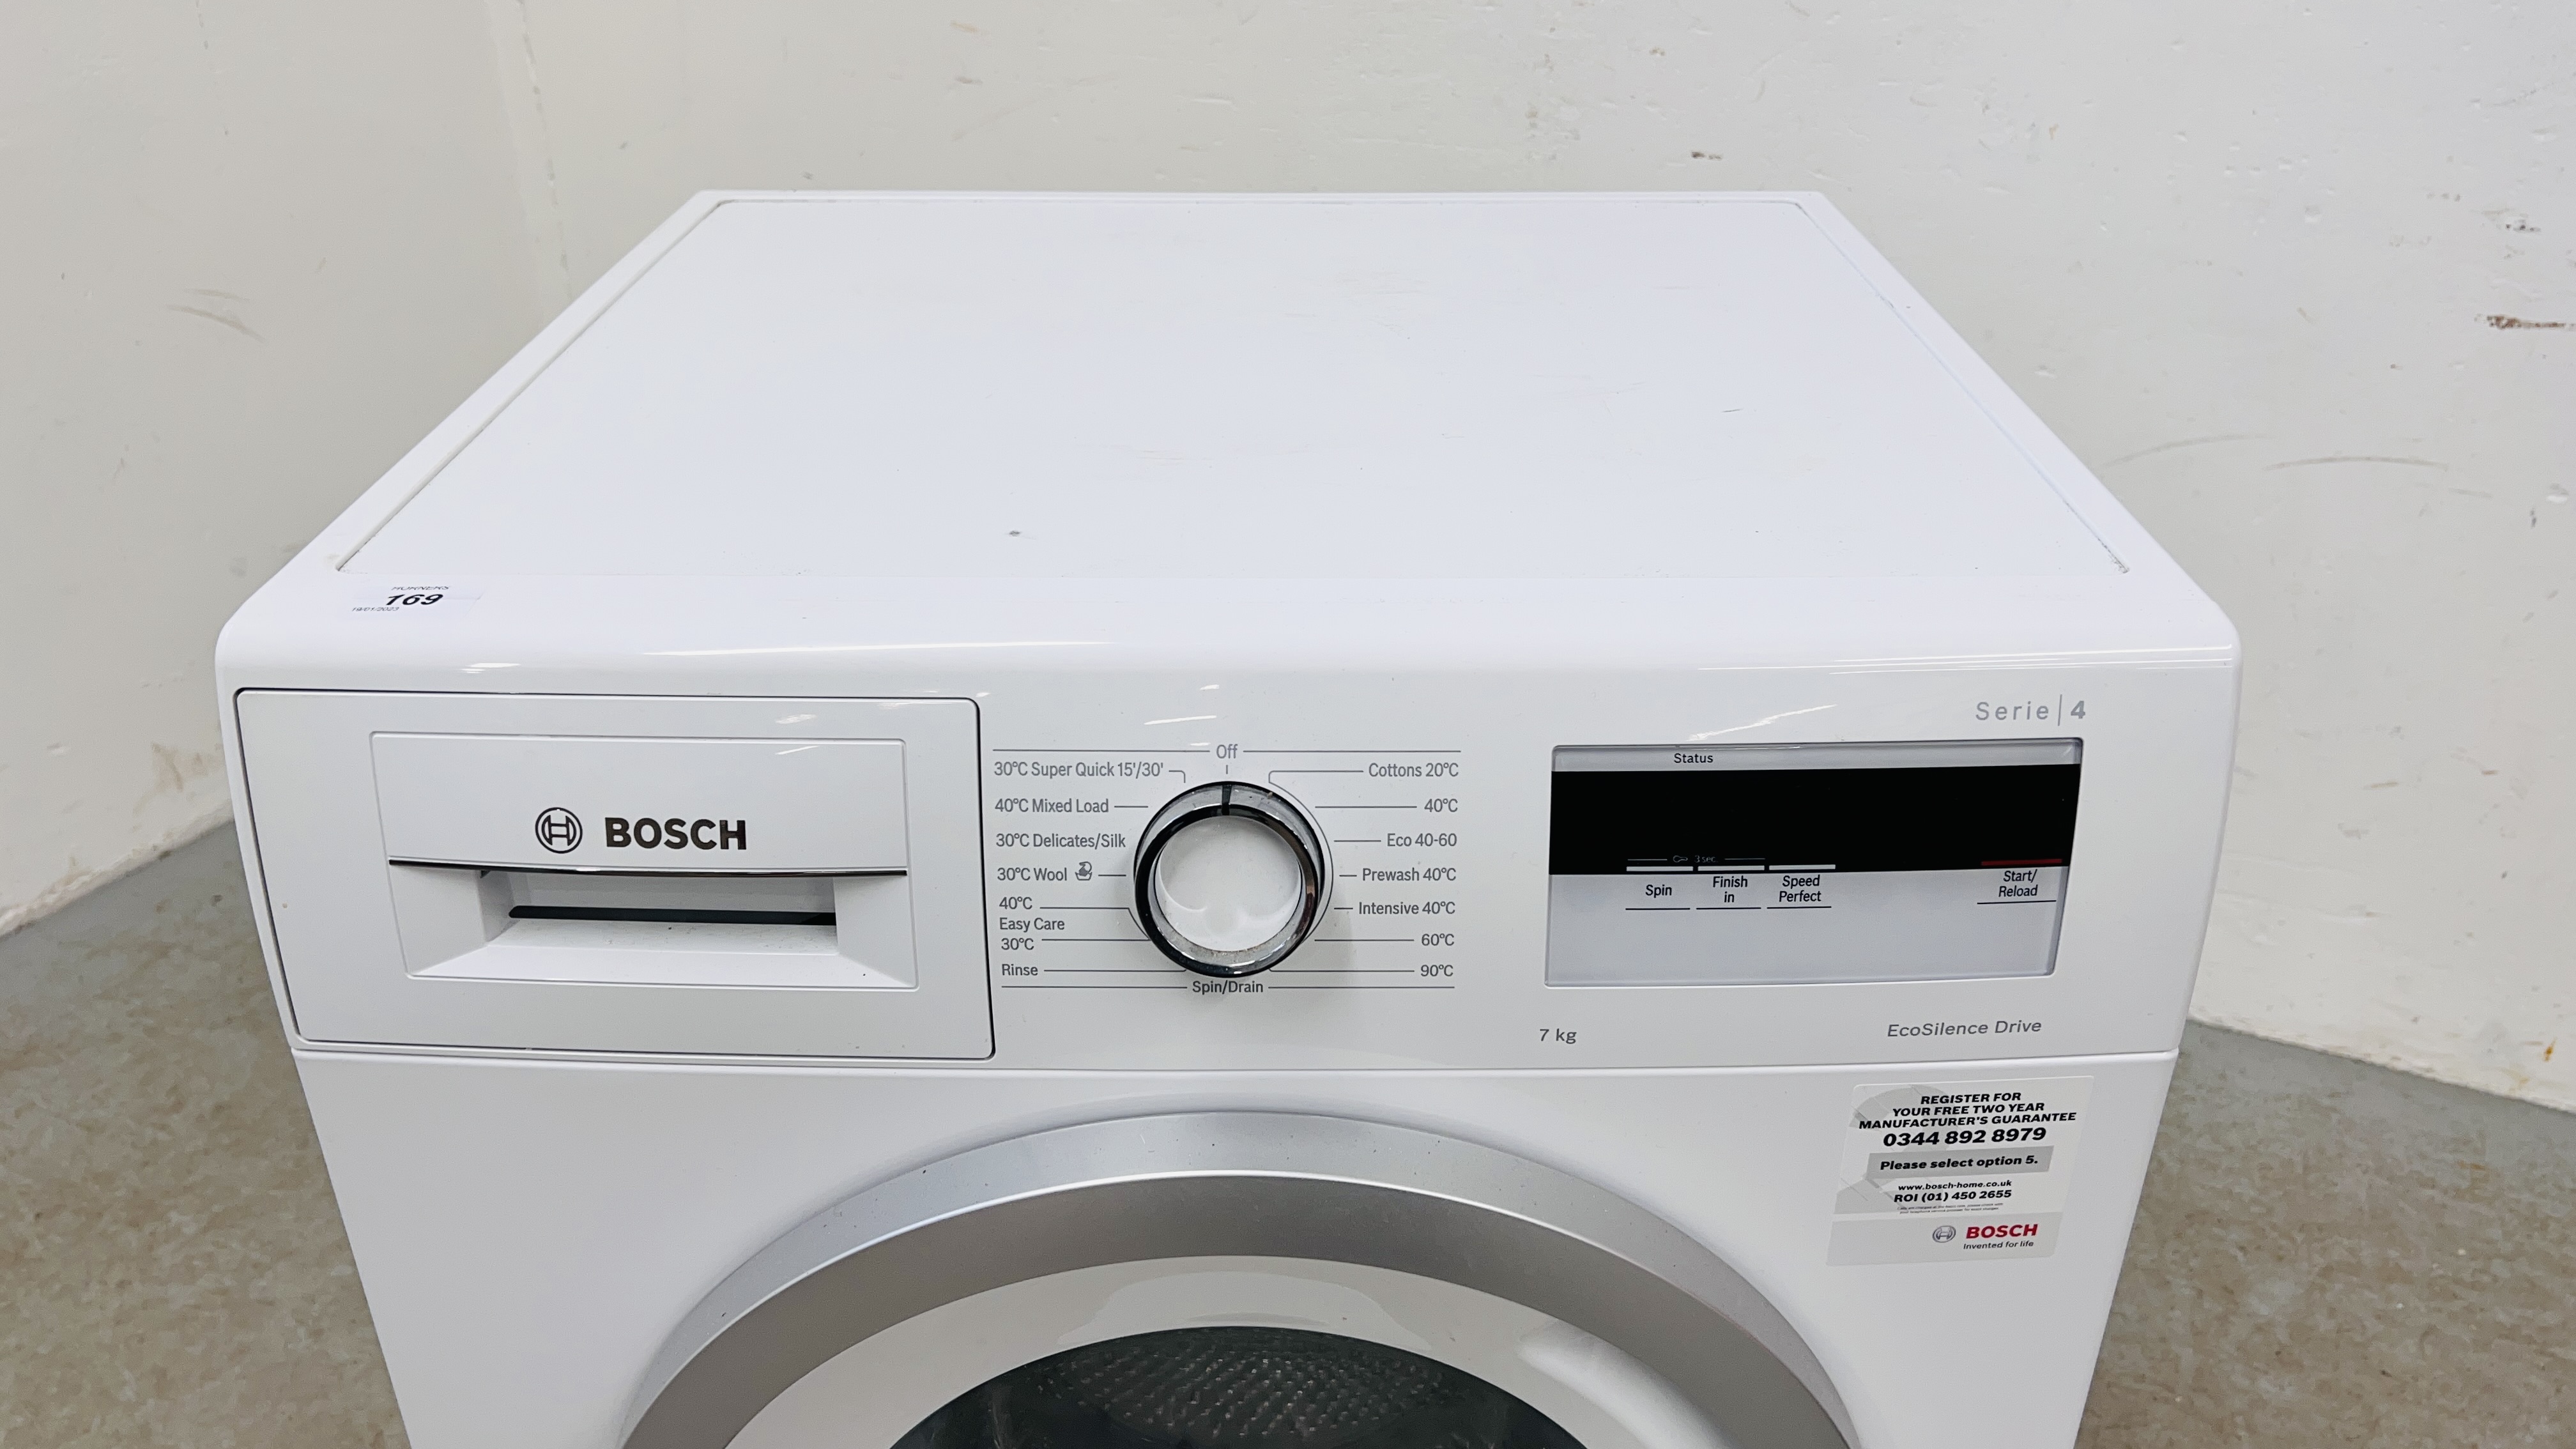 A BOSCH SERIE 4 7KG ECO SILENCE DRIVE WASHING MACHINE - SOLD AS SEEN. - Image 2 of 13